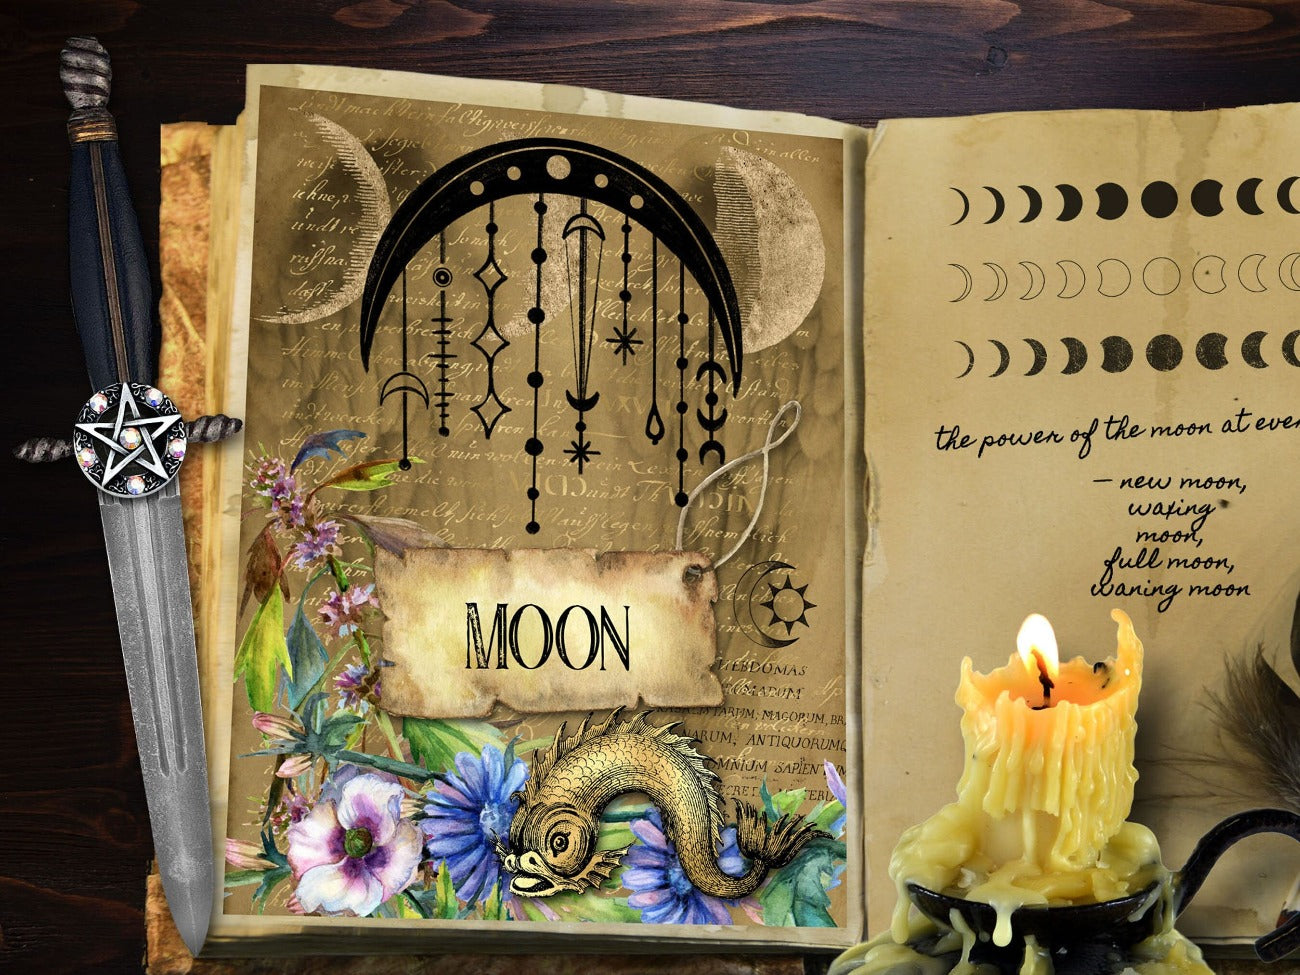 Image of Moon title page with crescent moons, a Wiccan symbol, mythical creature and floral art- - Morgana Magick Spell